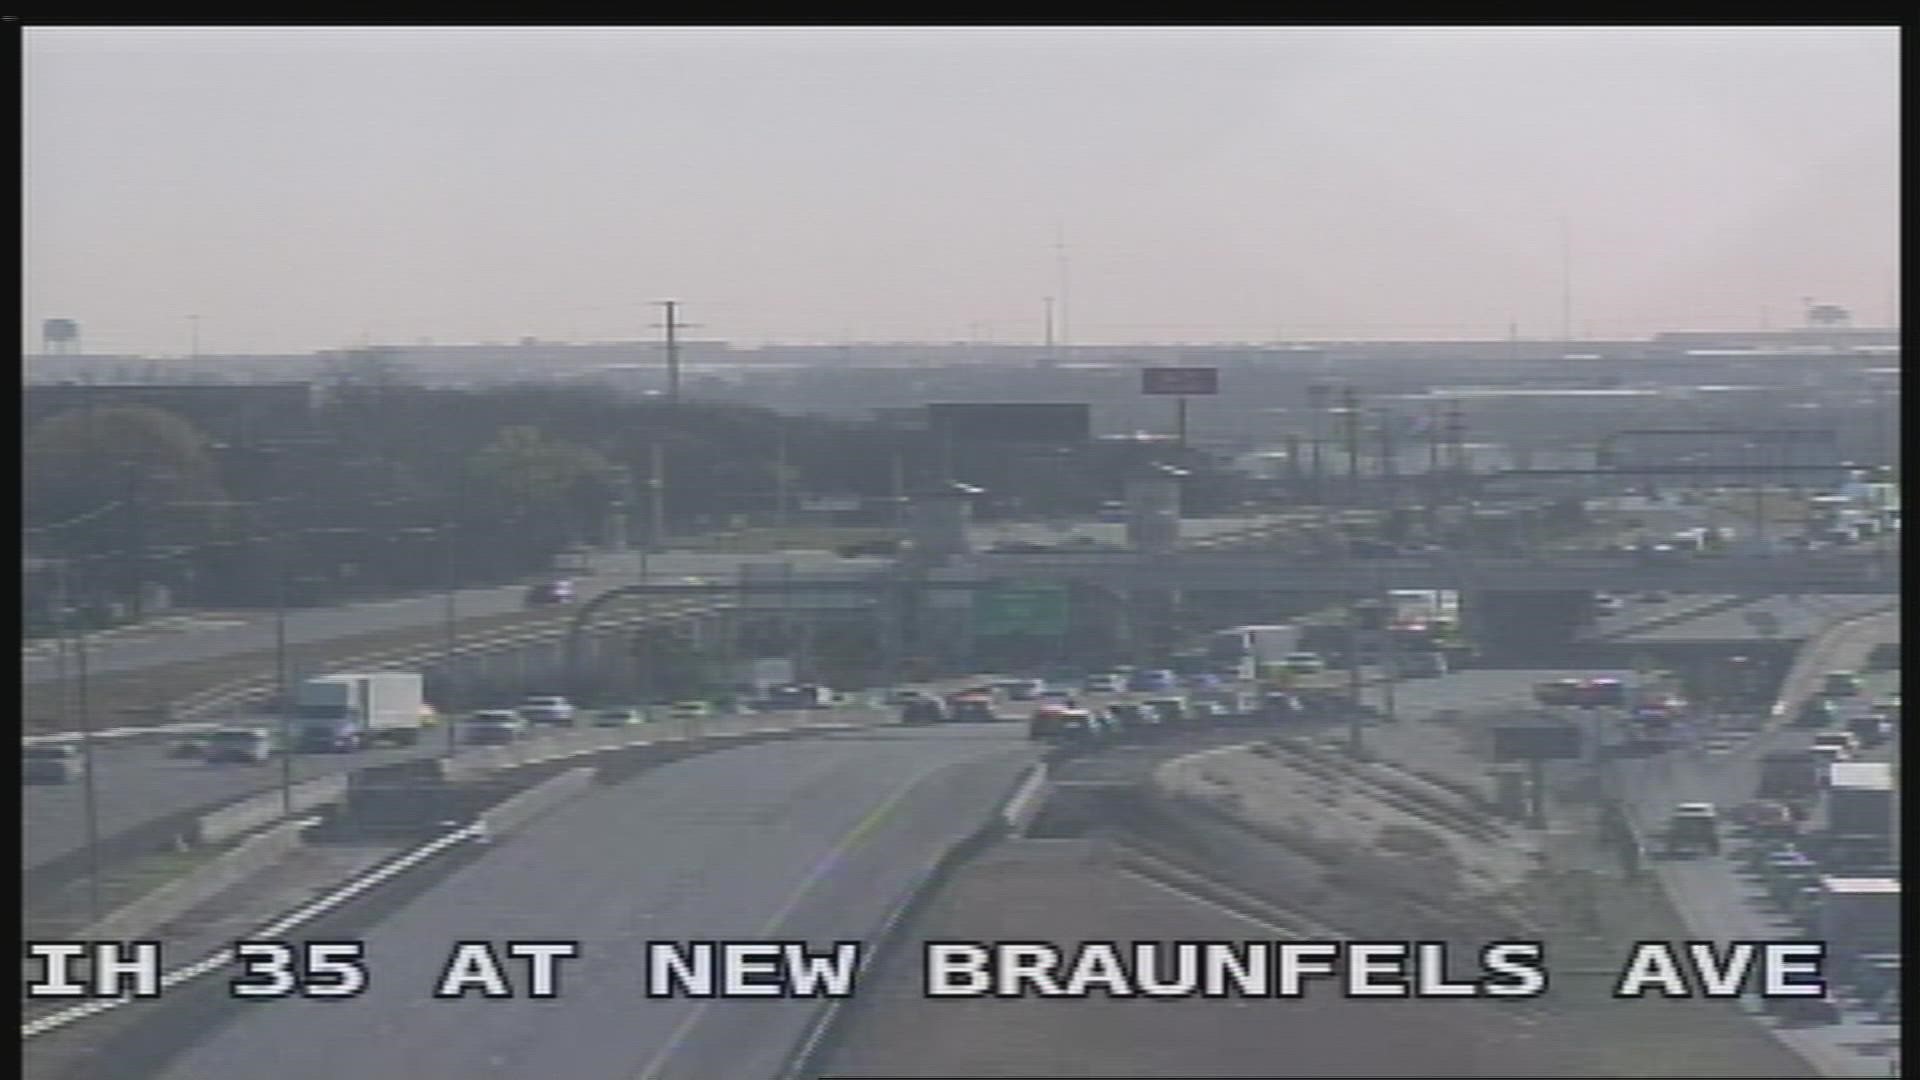 Lanes of I-35 at North New Braunfels are closed due to an accident